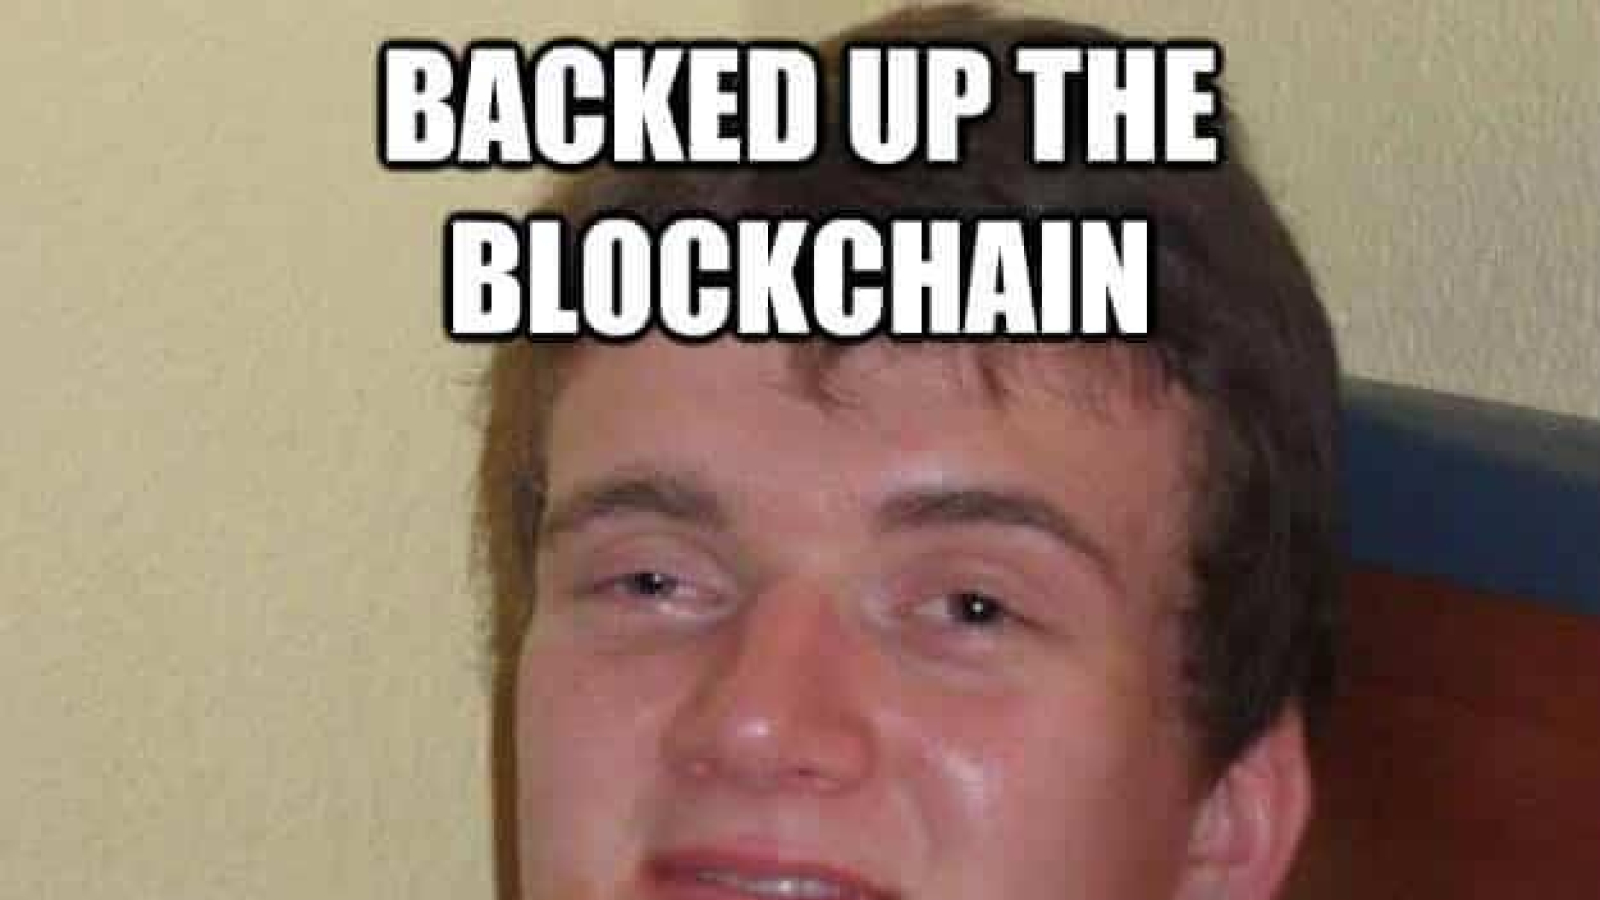 Back up the Blockchain